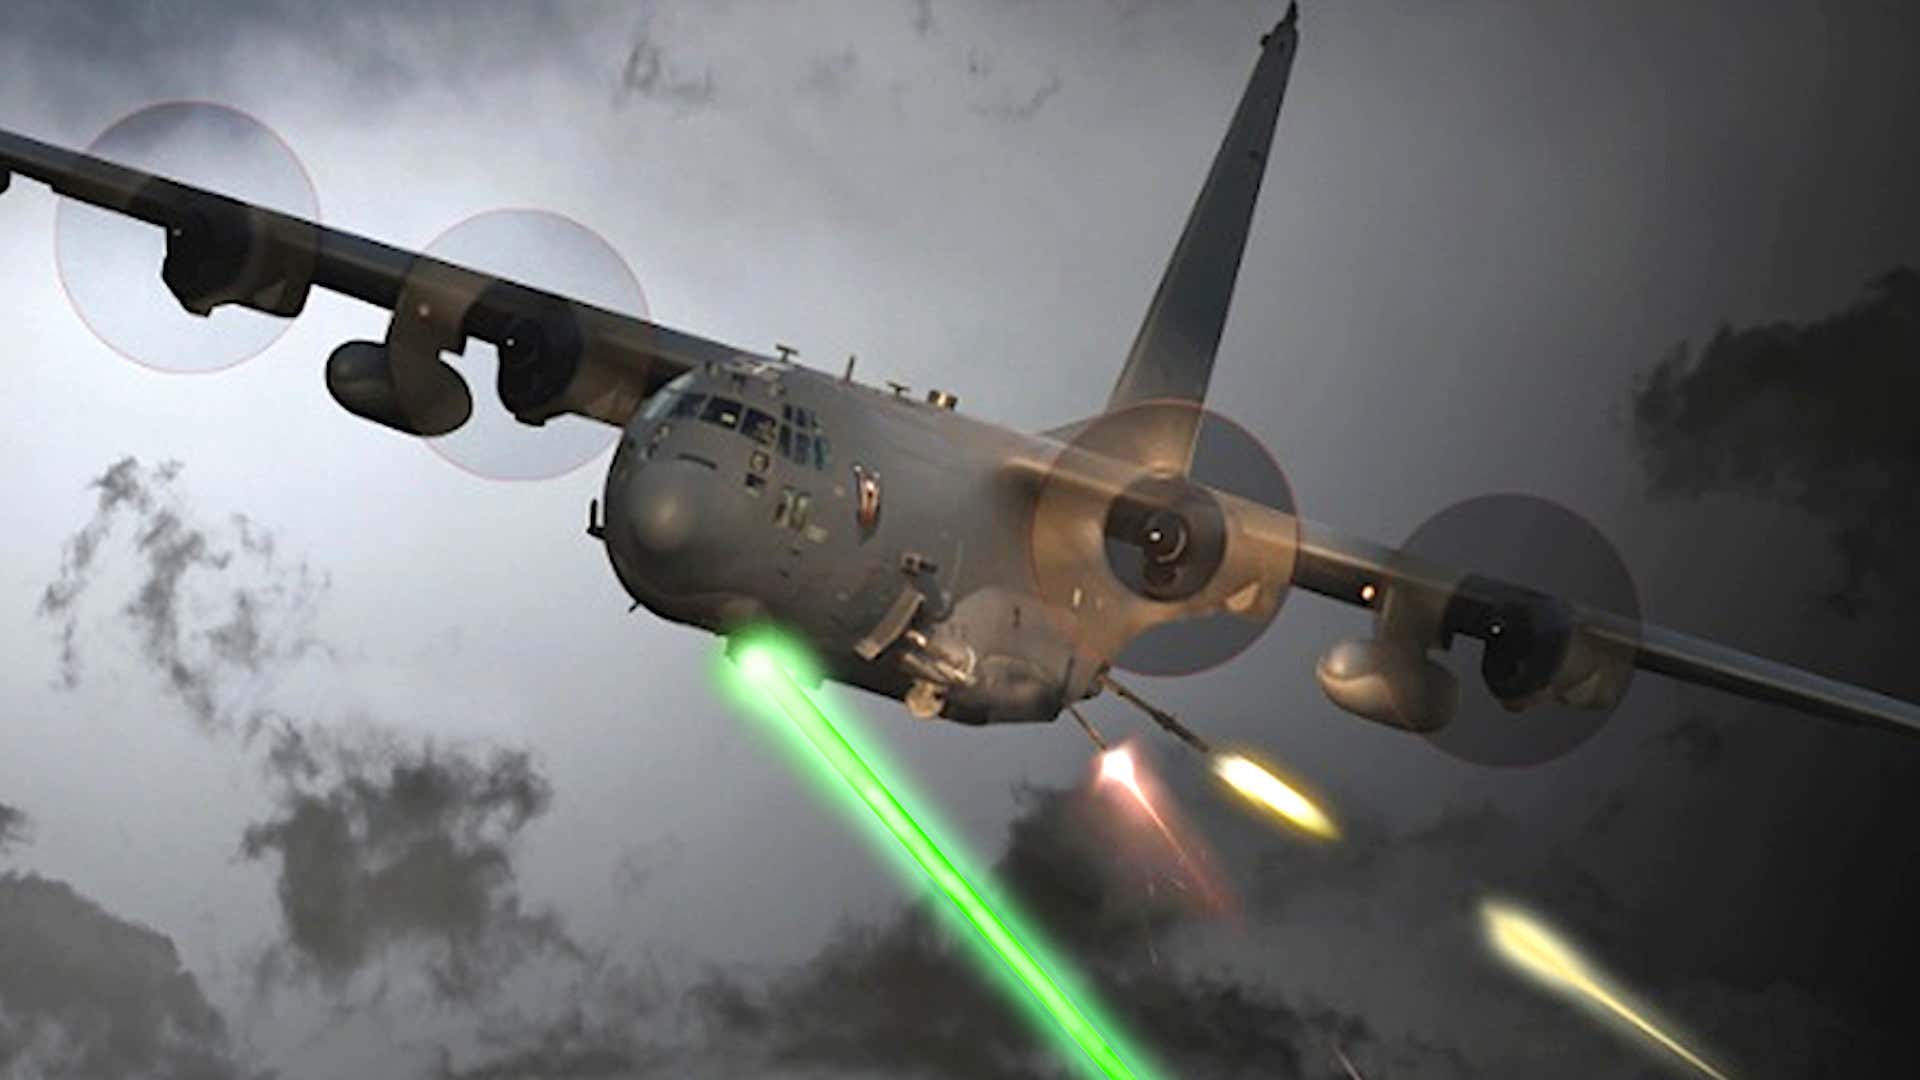 Air Force takes delivery of 'stealthy' laser weapon for Ghostrider gunships - Sandboxx